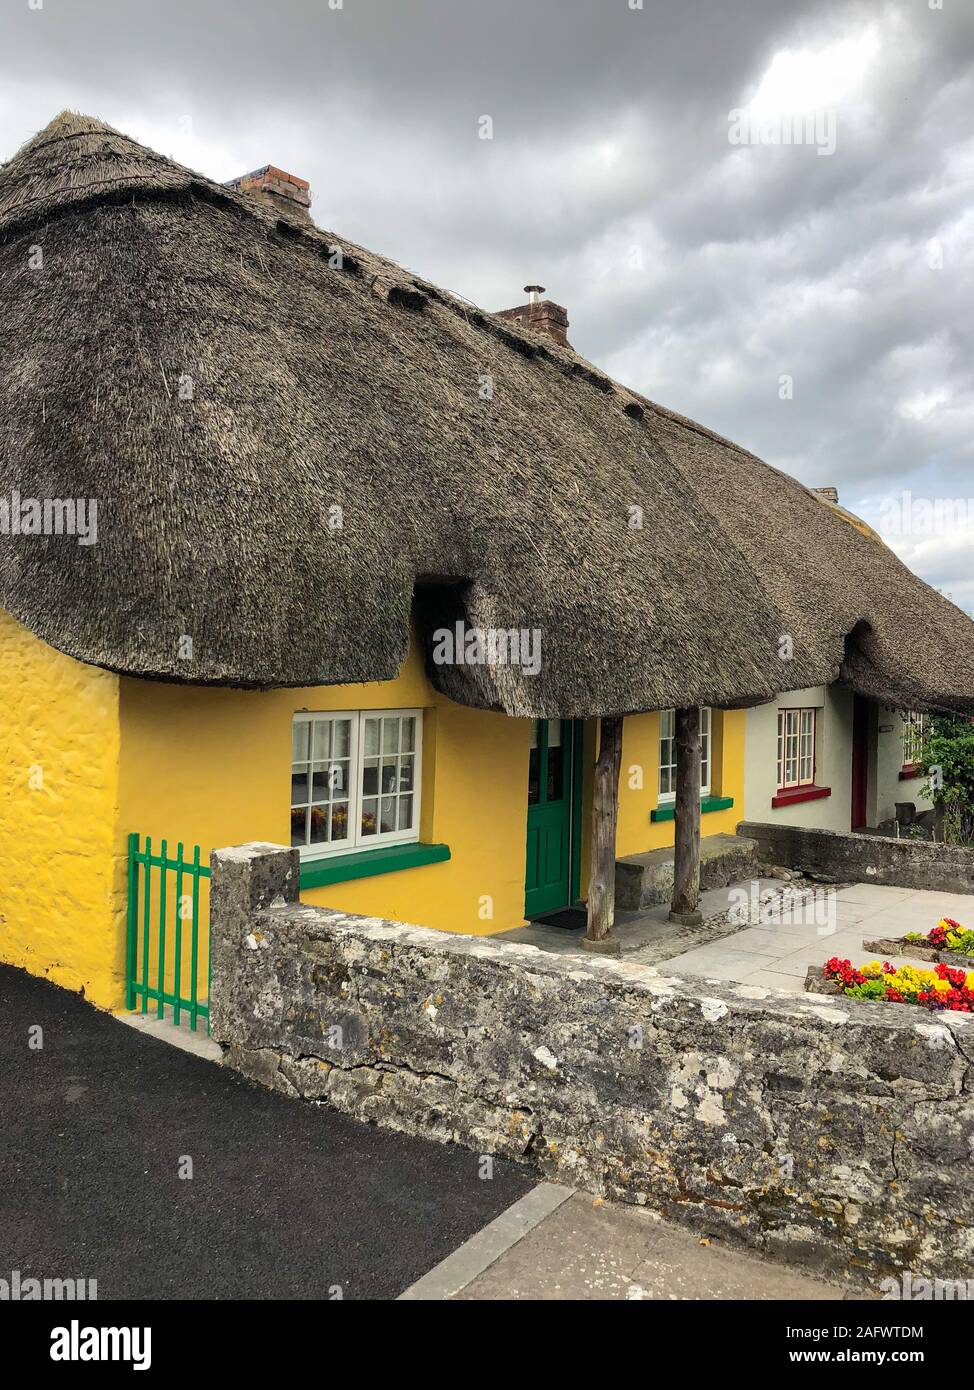 Adare, Ireland - 13 July,2018: Typical old cottage in Adare. Adare is a small village in County Limerick, Ireland. Architectural forms include the tha Stock Photo